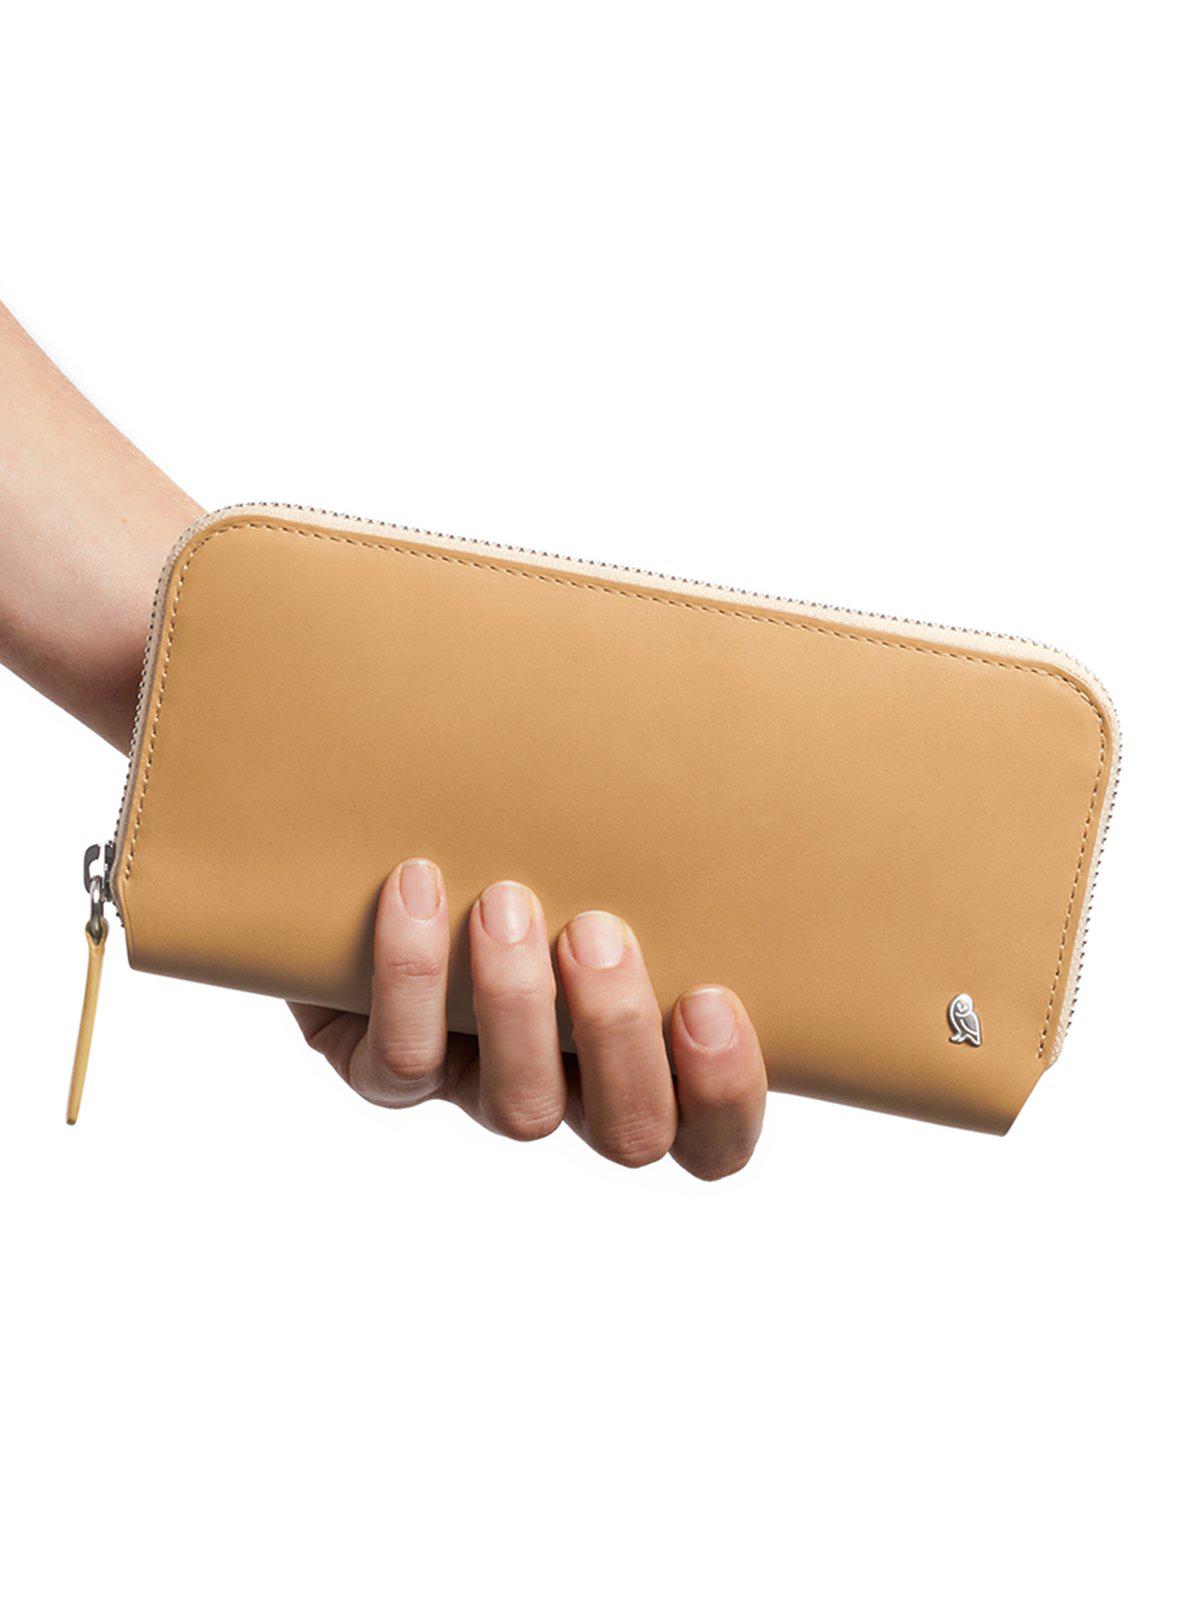 Bellroy Folio Wallet Tan RFID - MORE by Morello Indonesia